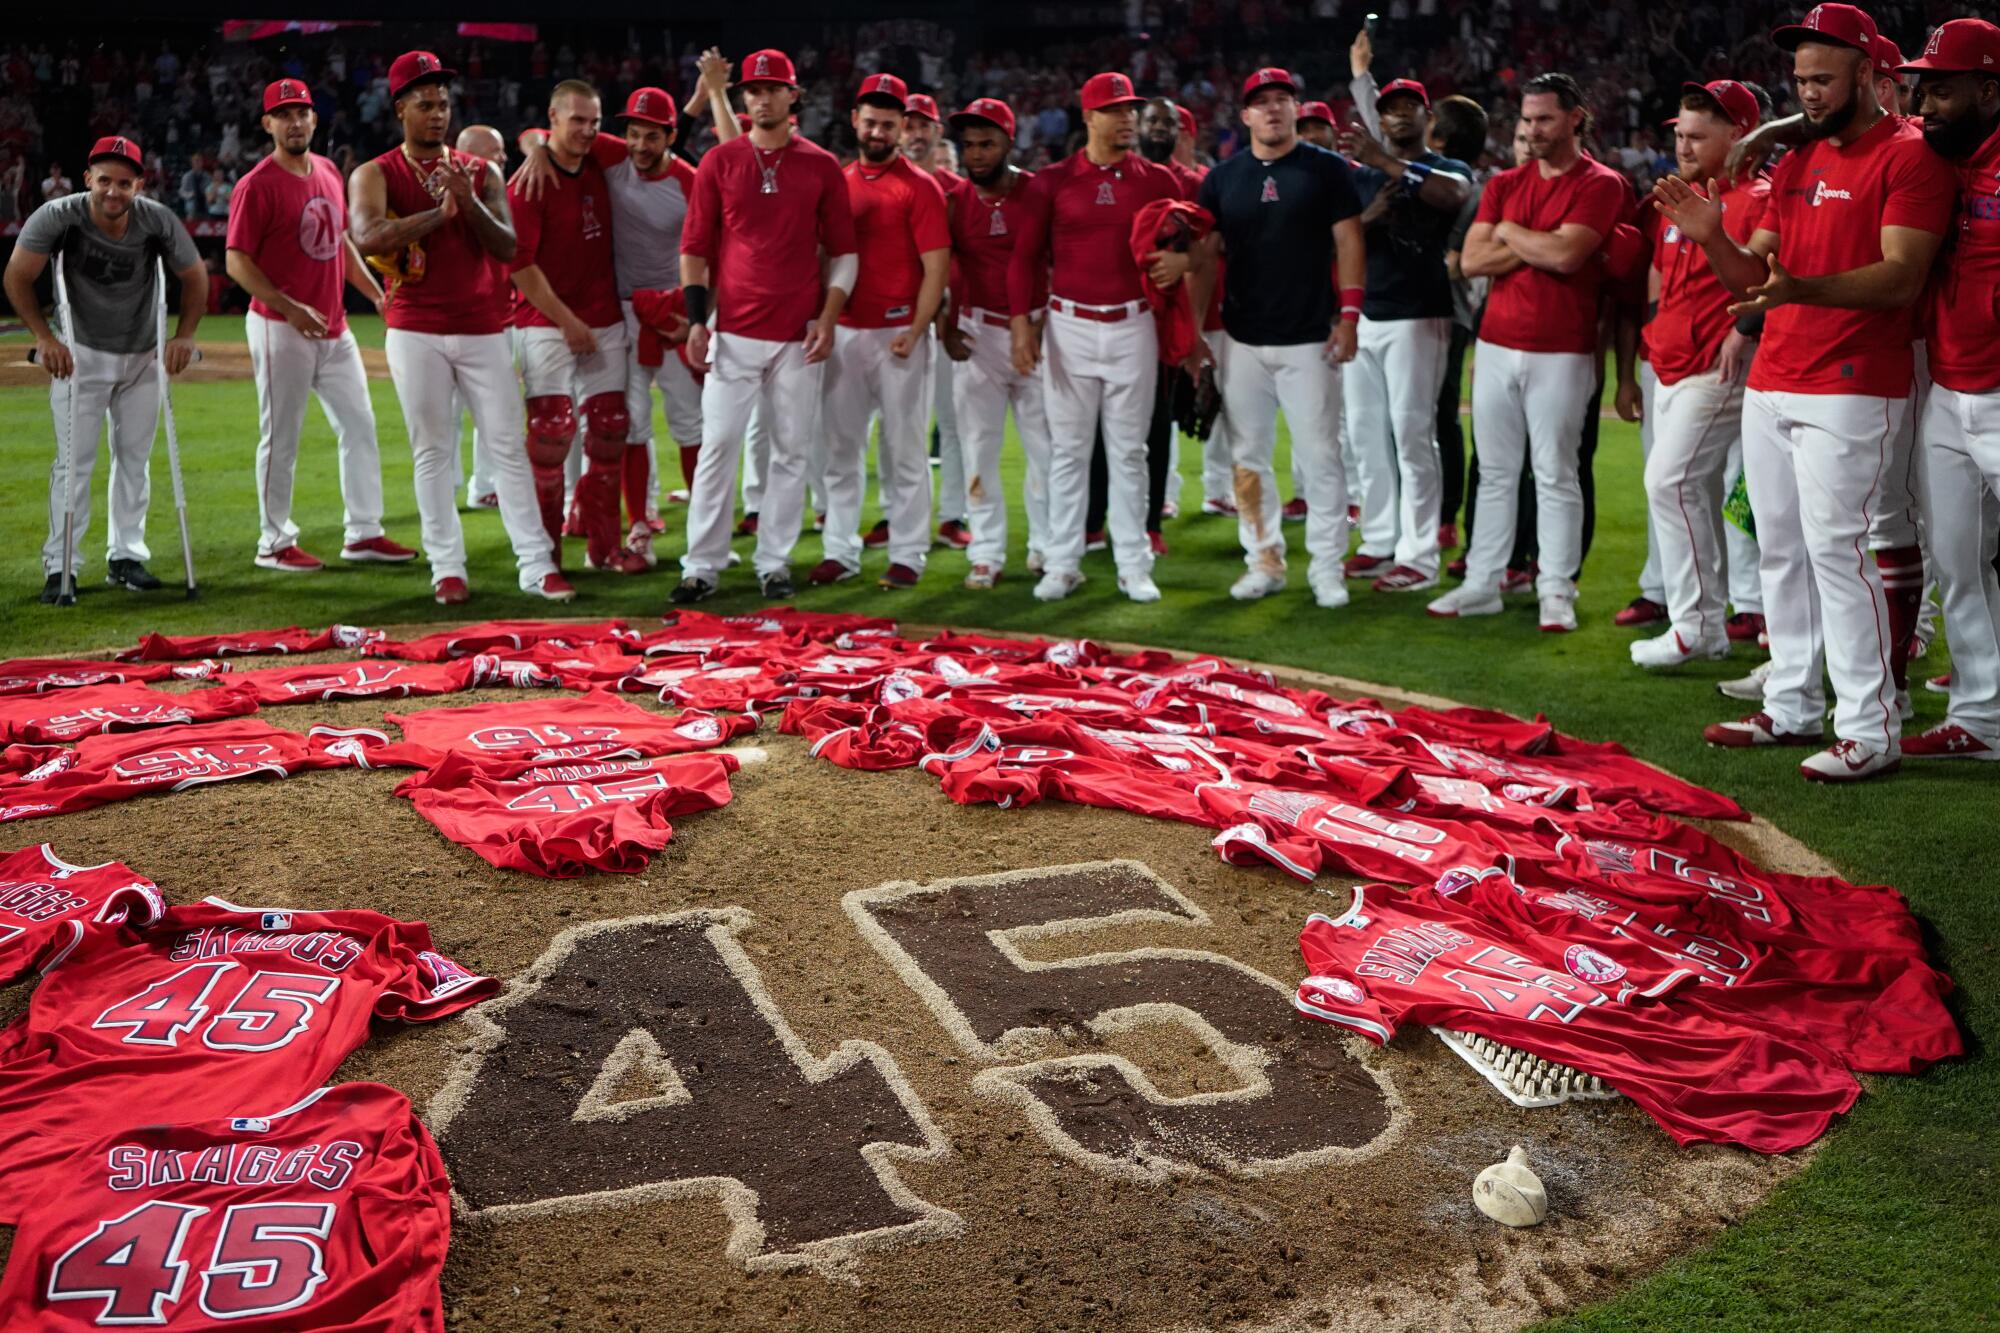 Angels players put jerseys for teammate Tyler Skaggs on the pitcher's mound.